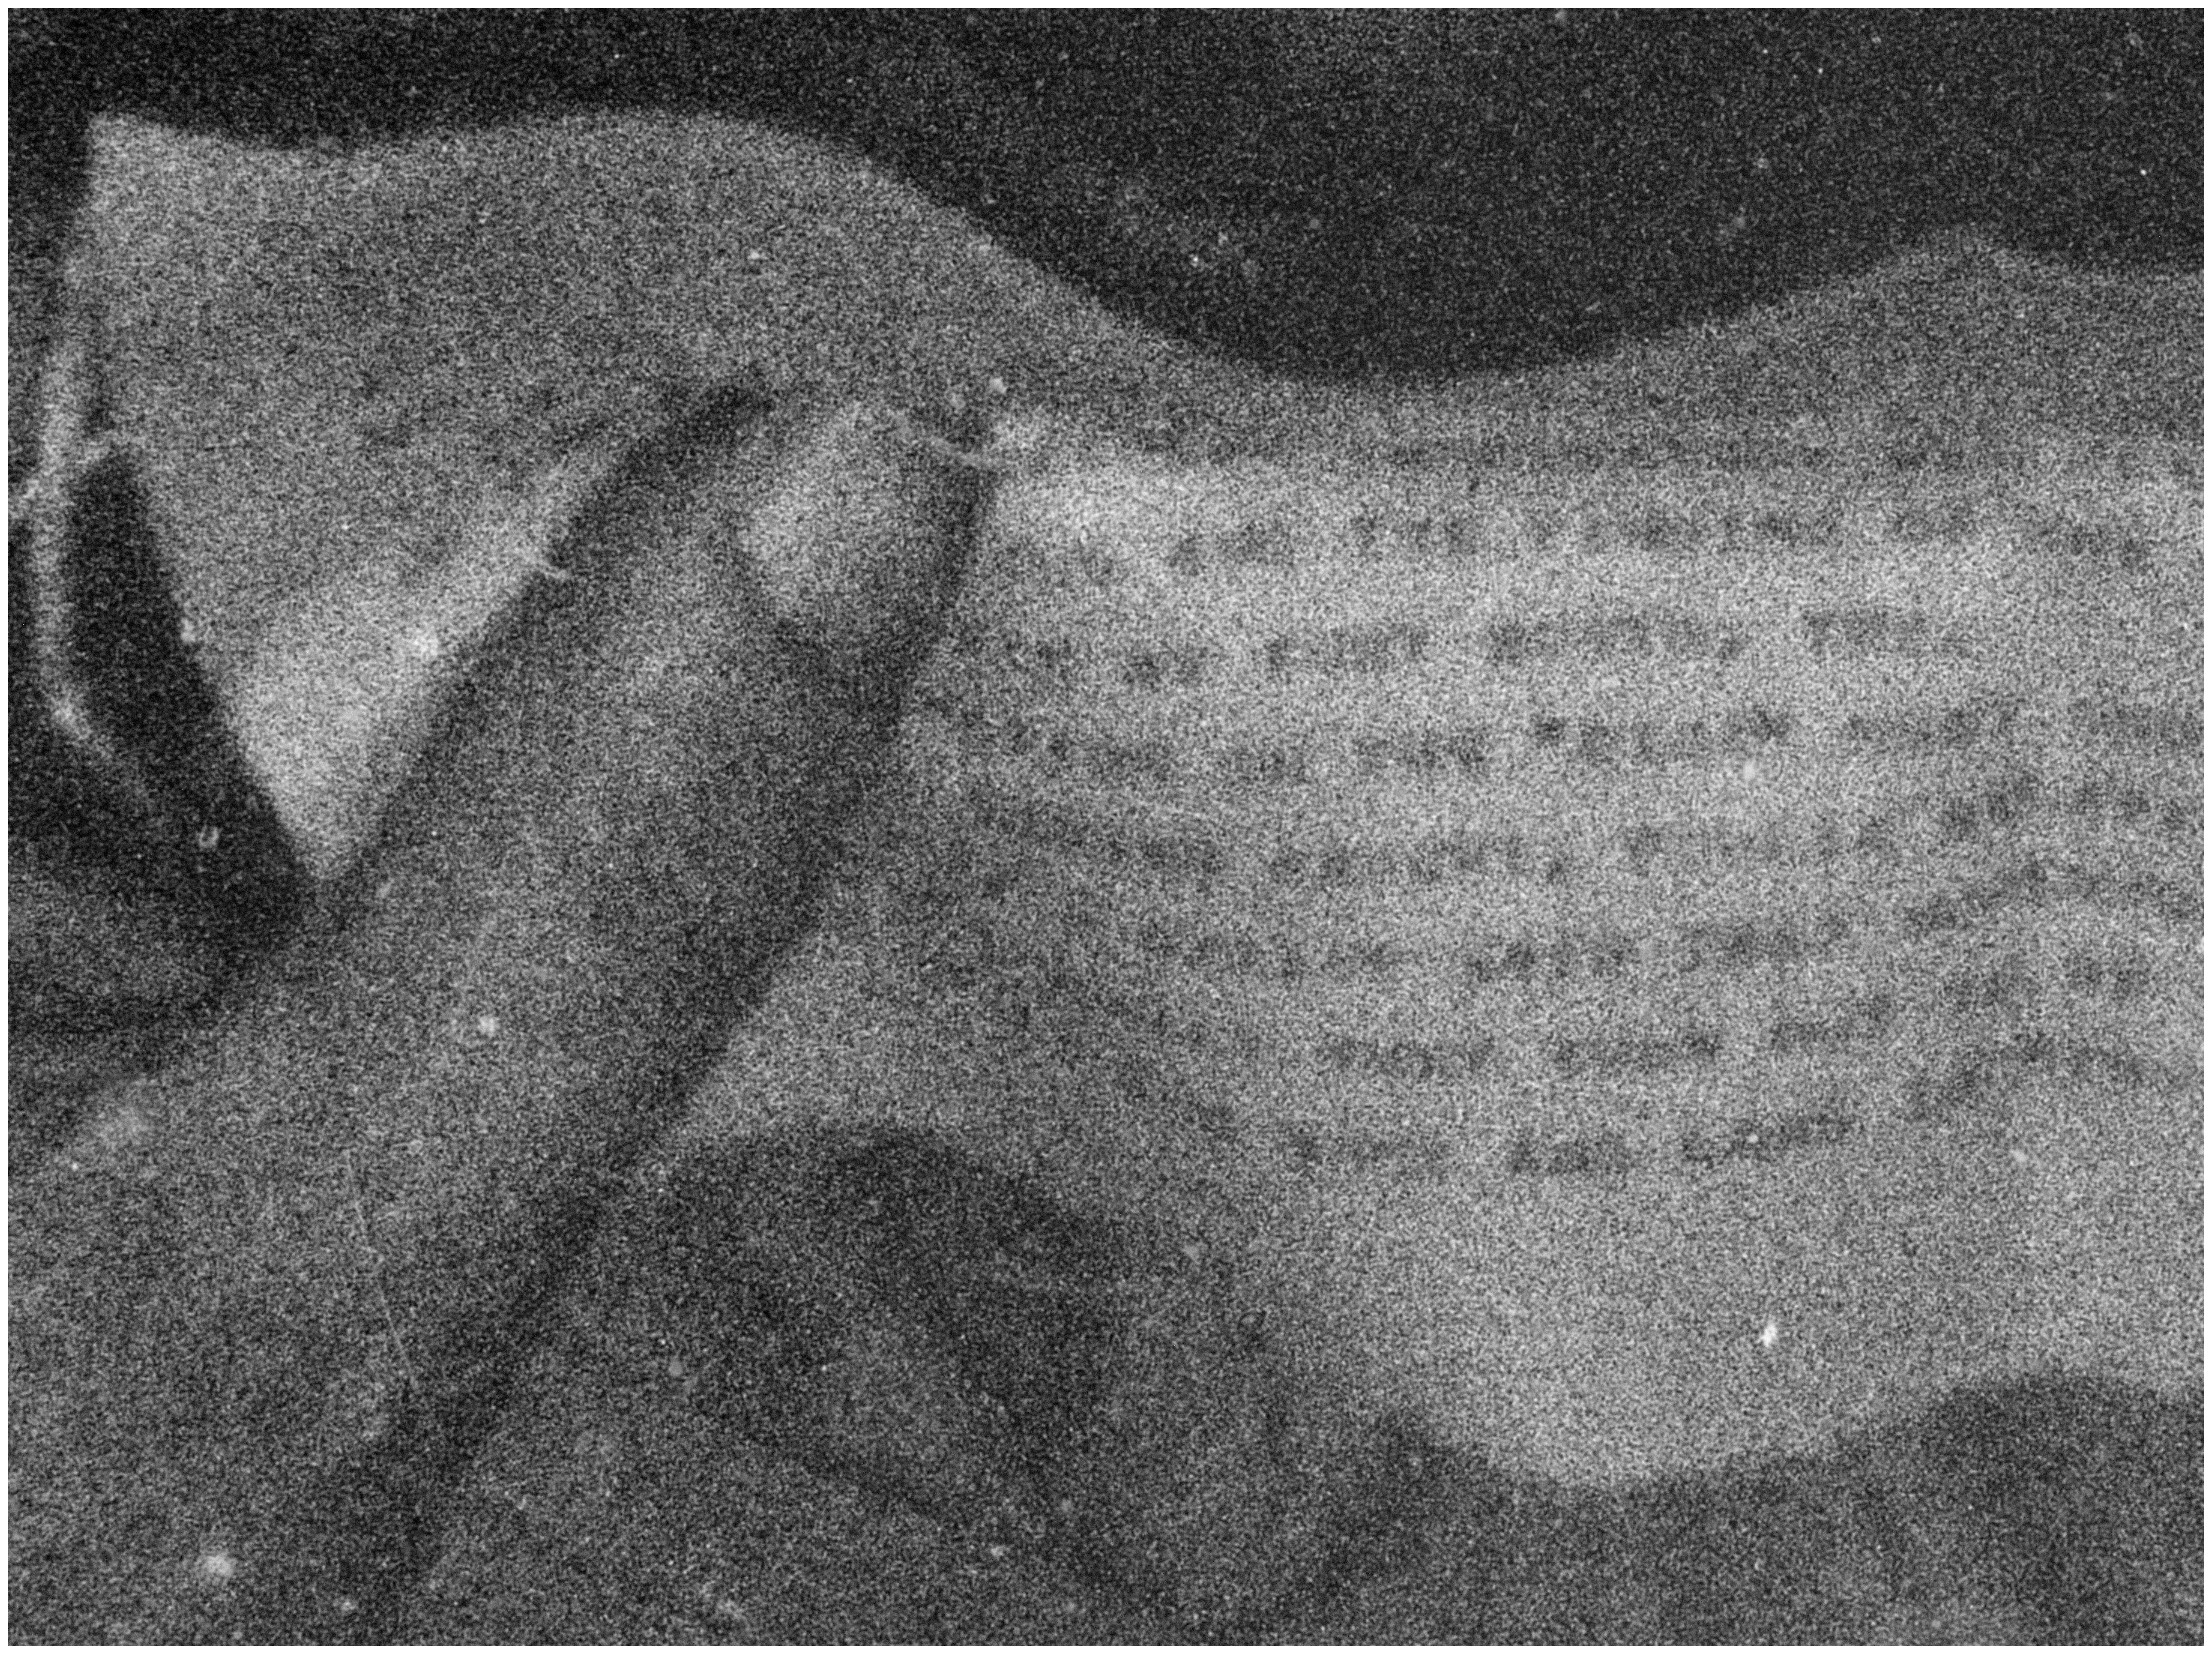 A close up of the memo and a person's thumb as they hold it. The writing is illegible and the photo is very pixelated. 